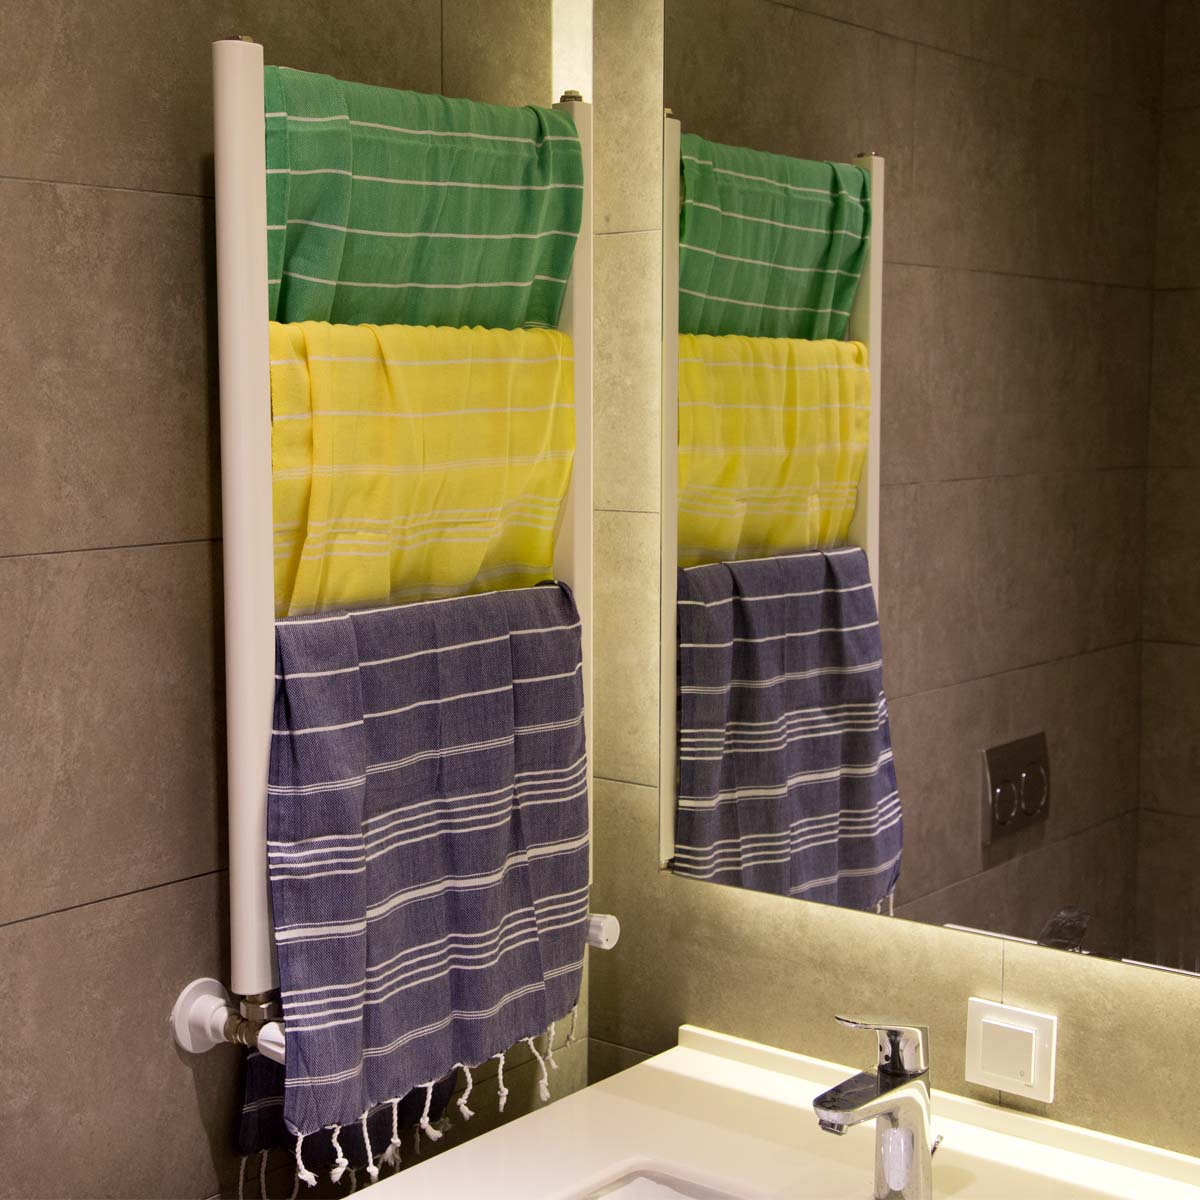 Clotho Turkish Hand Towel for Bathroom Set of 4 | Decorative Hand Towels 4  Pack for Kitchen | 100% Cotton 18 x 40 Inches Lightweight Travel Hand Towel